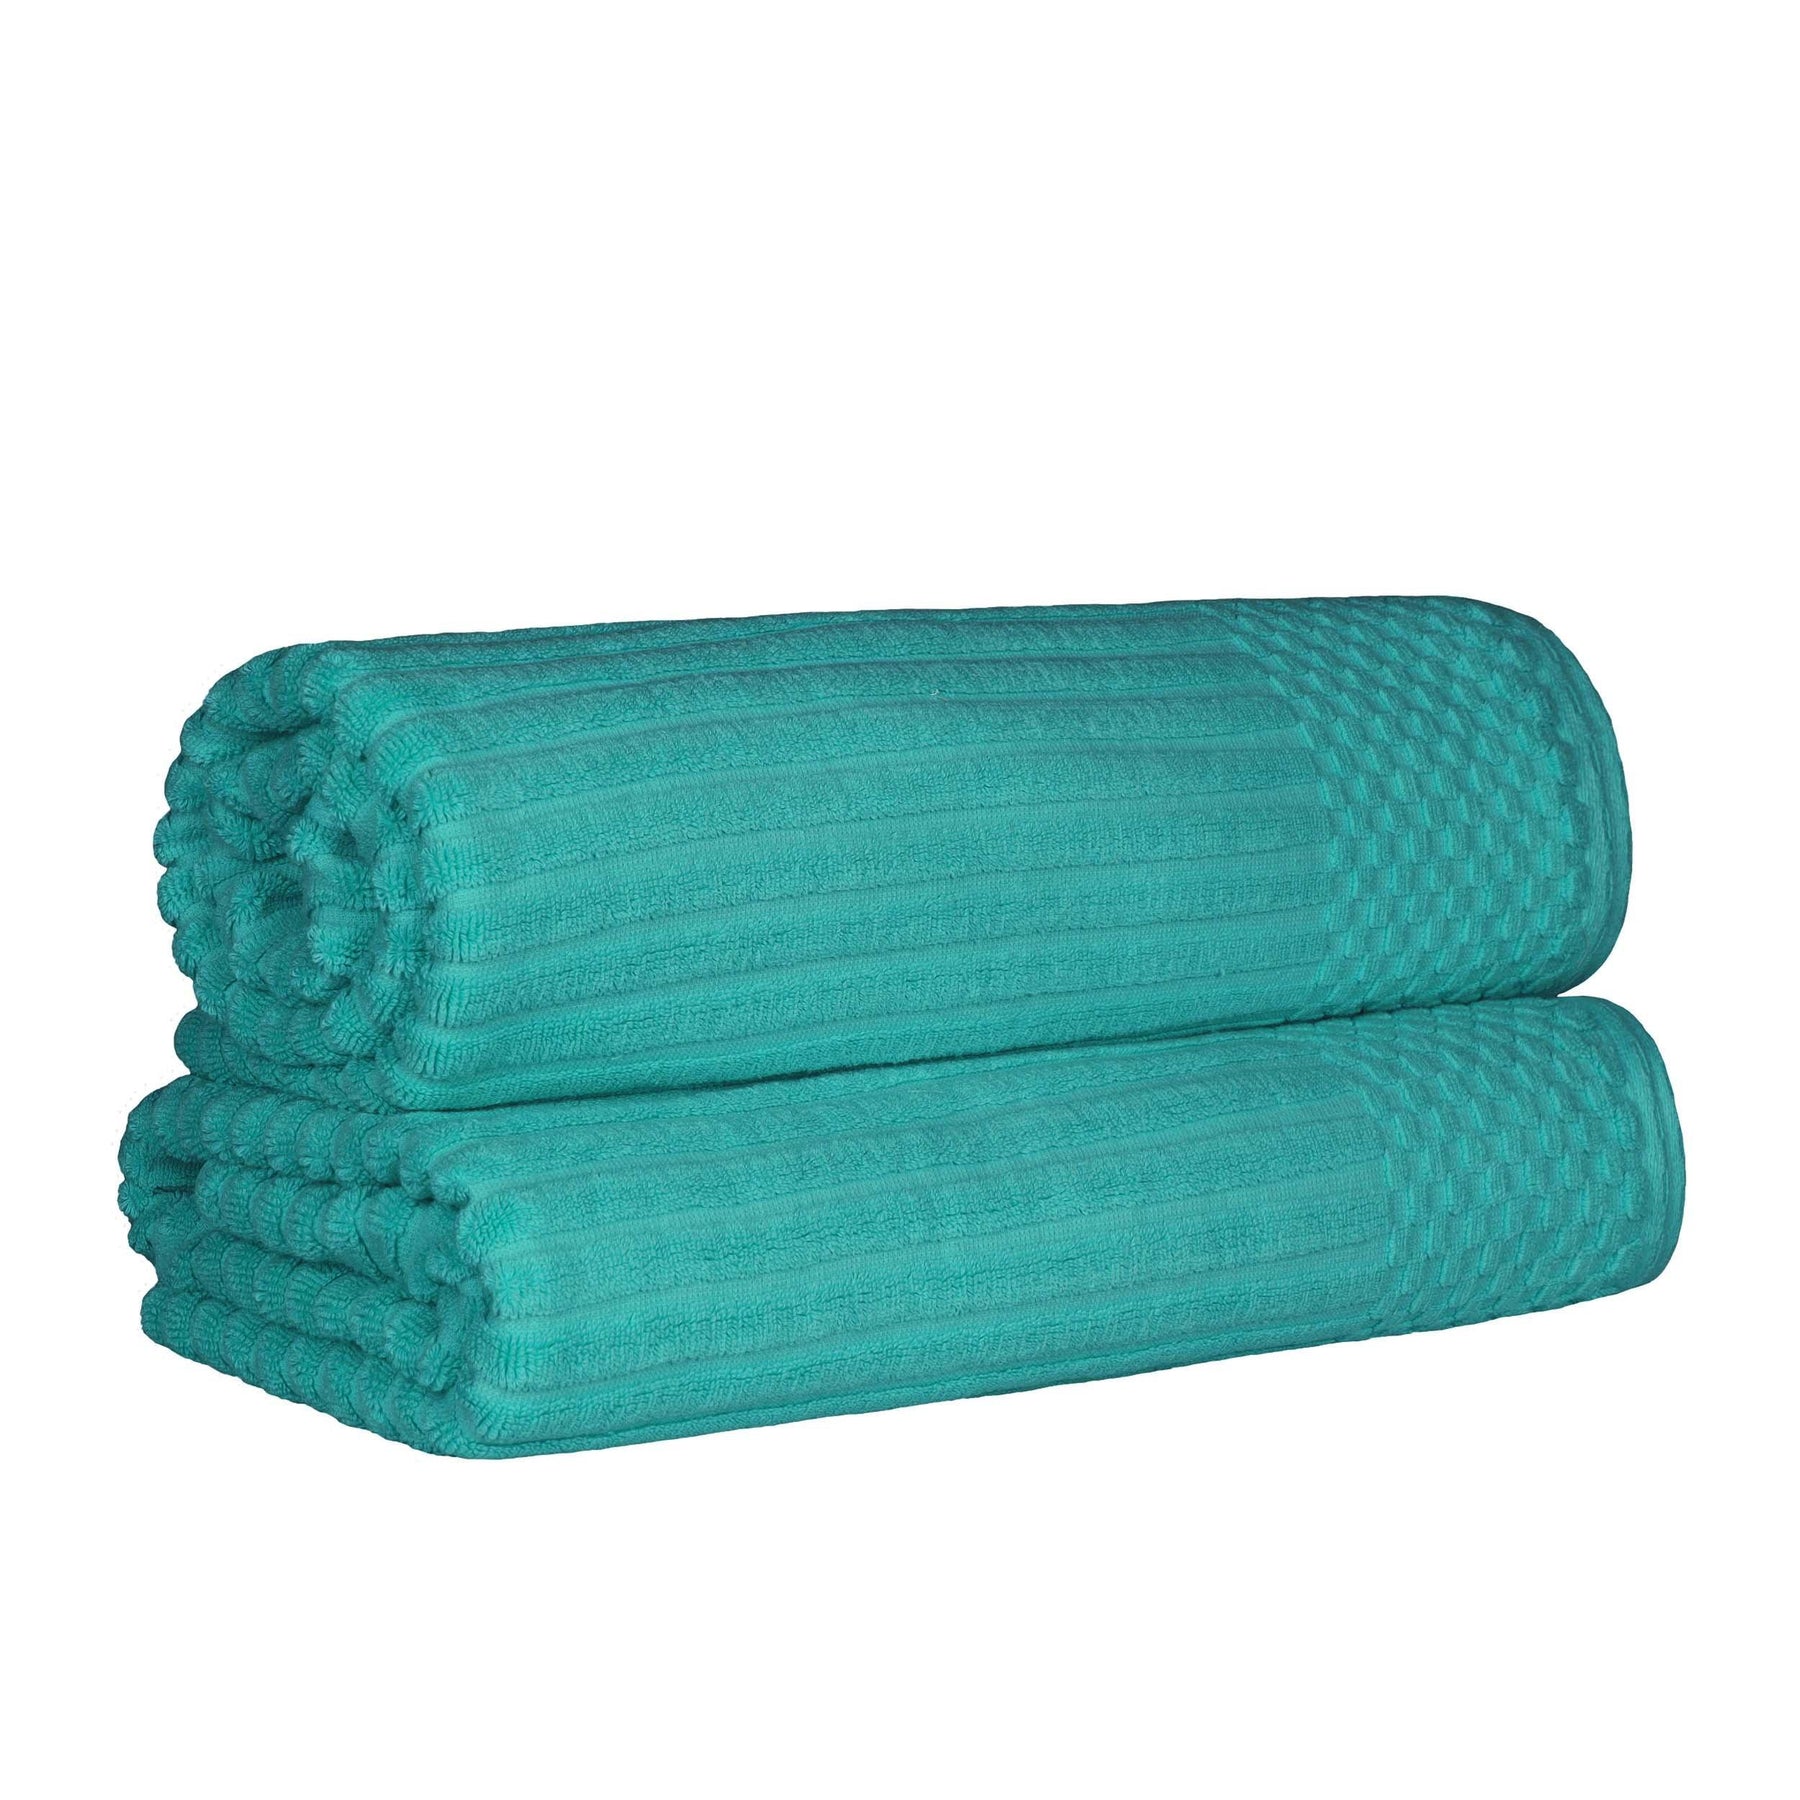 Ribbed Textured Cotton Bath Sheet Ultra-Absorbent Towel Set - Turquoise